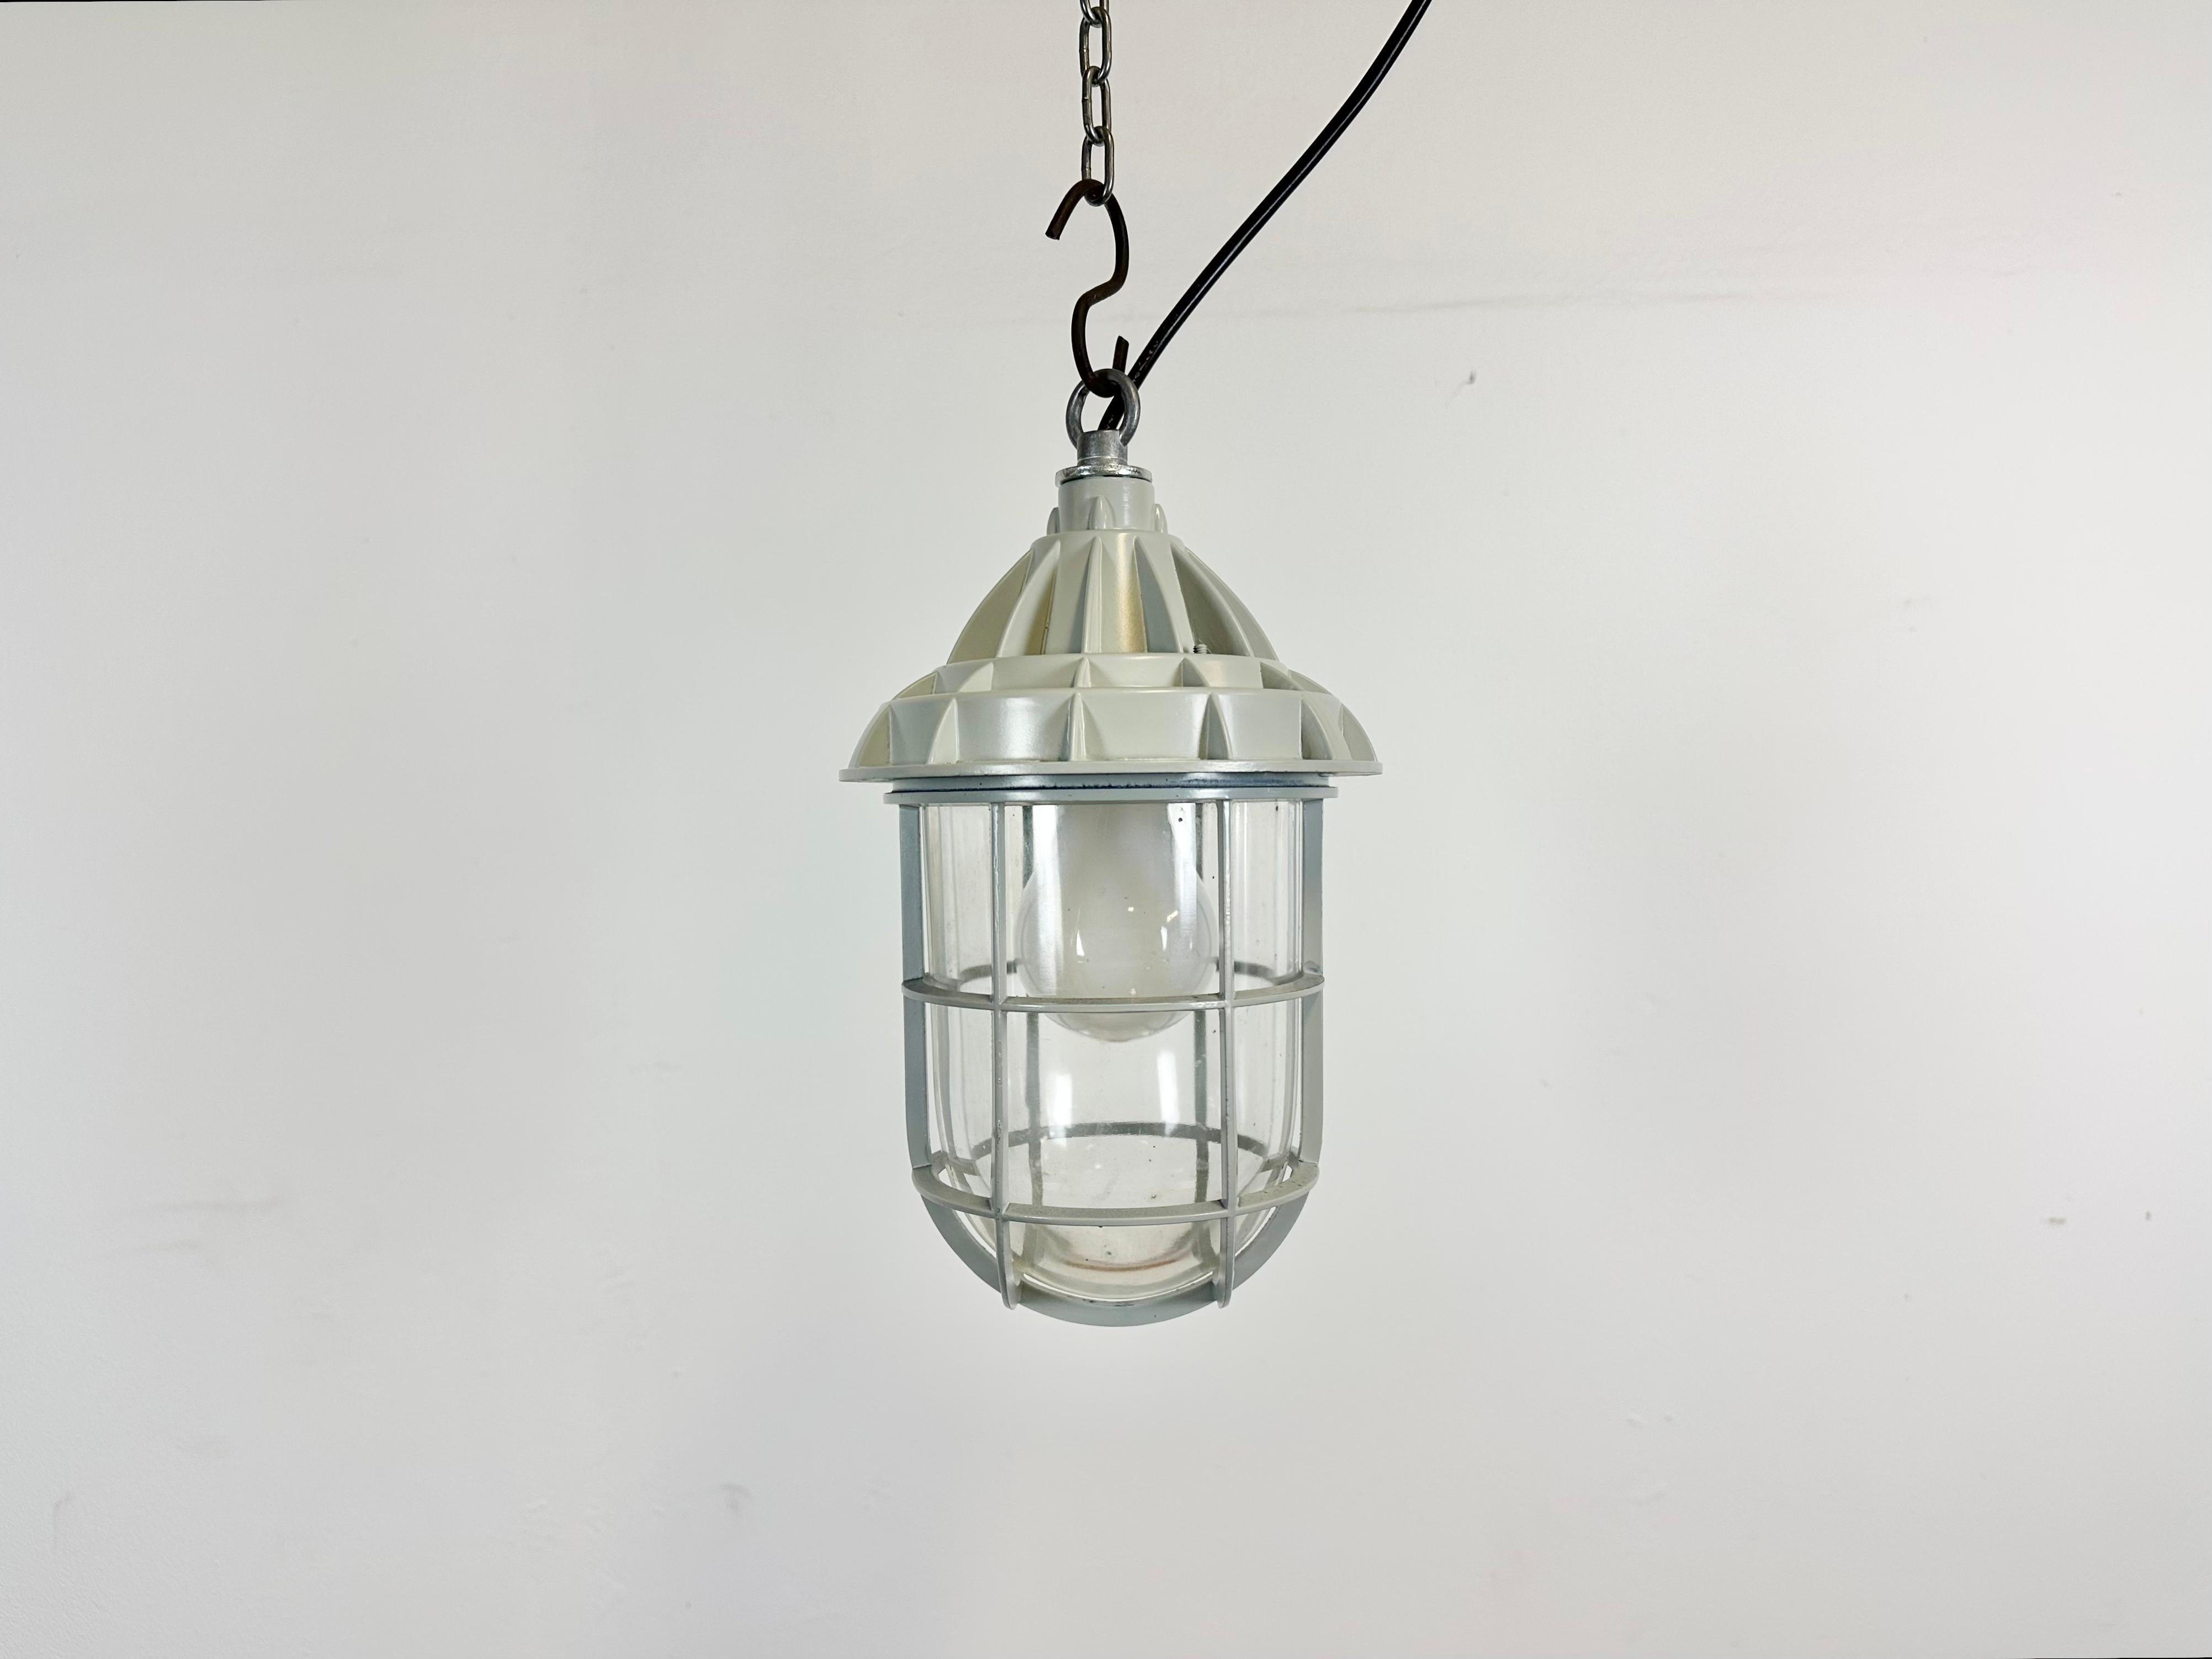 Induatrial cage pendant light made by Yamada Co.Ltd. in Japan during the 1960s. It features a cast aluminium body and a clear glass cover. The socket requires E 26/ E 27 light bulbs. The weight of the light is 1.9 kg.